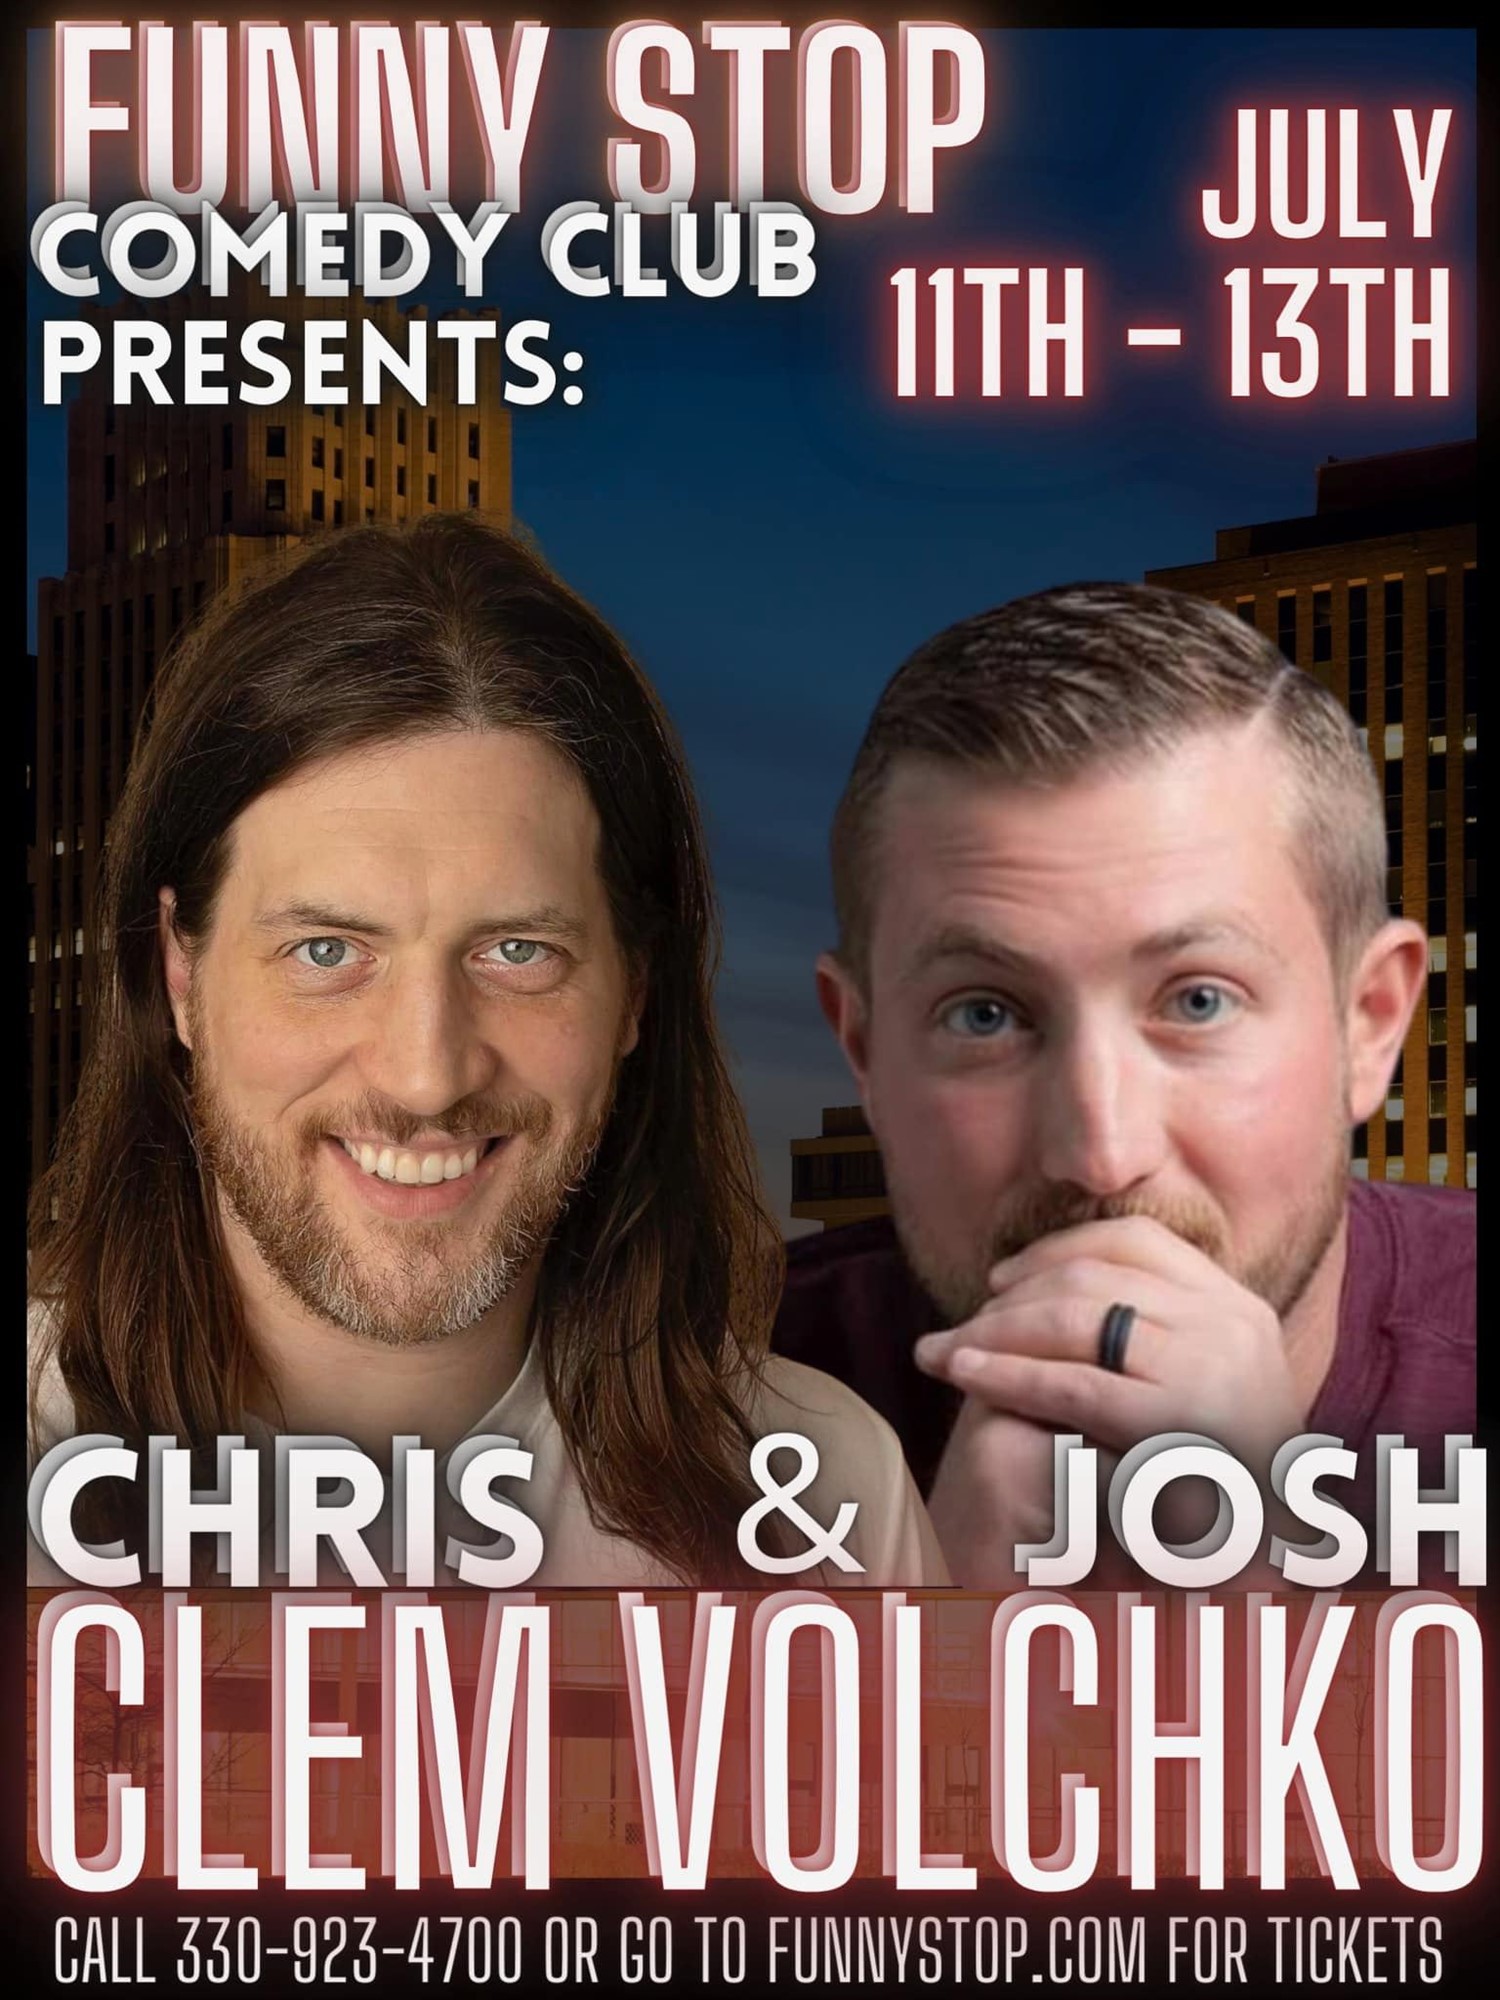 Chris Clem & Josh Volchko - Fri. 7:30PM Show Funny Stop Comedy Club on Jul 12, 19:30@Funny Stop Comedy Club - Buy tickets and Get information on Funny Stop funnystop.online